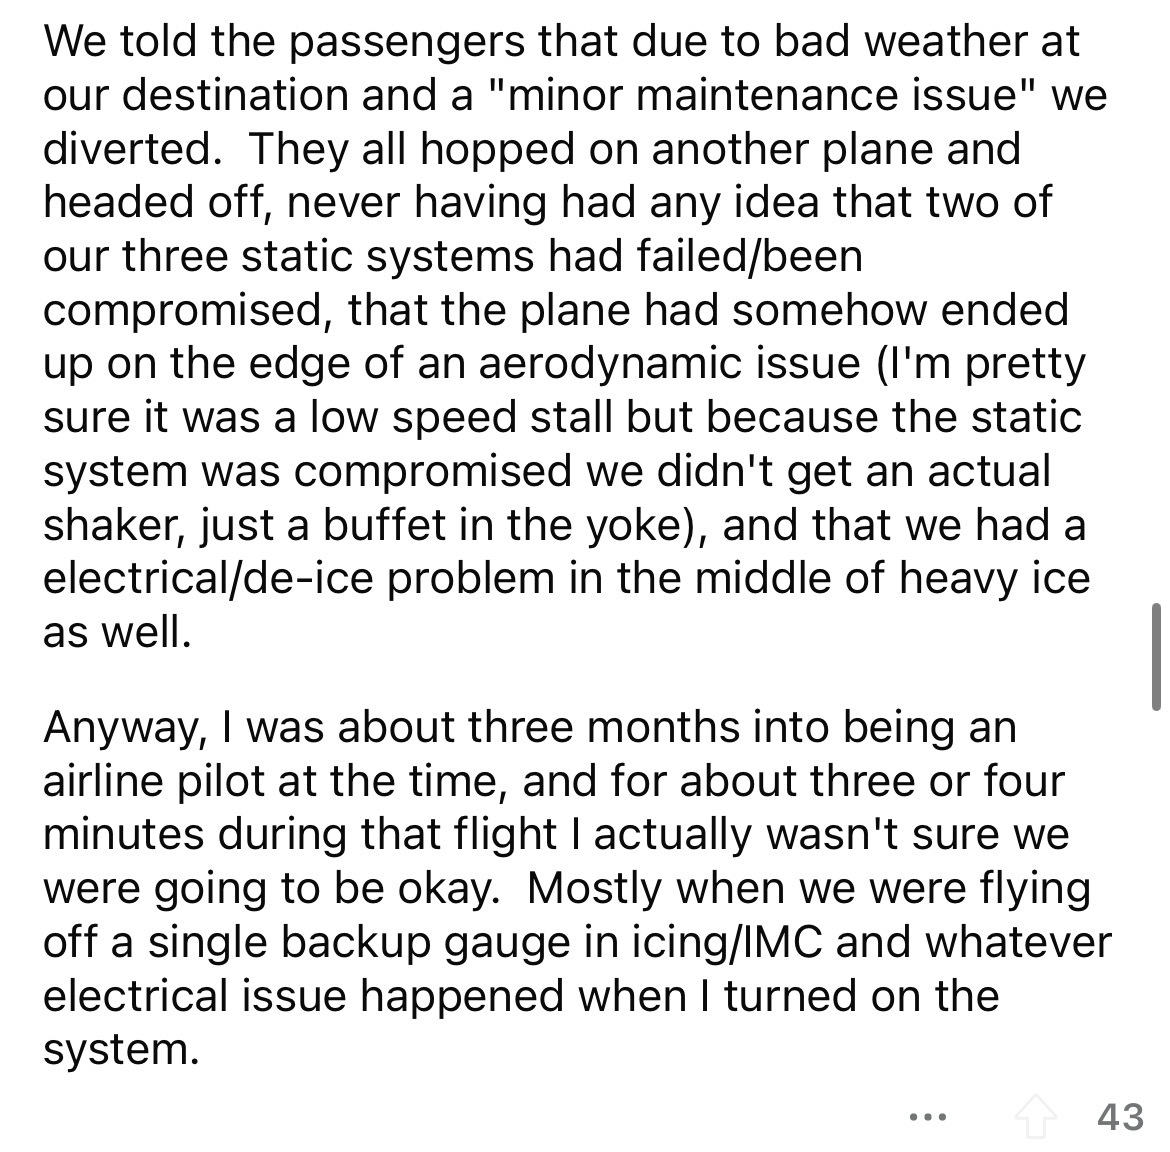 narration narrate how you prepared for the opening of classes this year - We told the passengers that due to bad weather at our destination and a "minor maintenance issue" we diverted. They all hopped on another plane and headed off, never having had any 